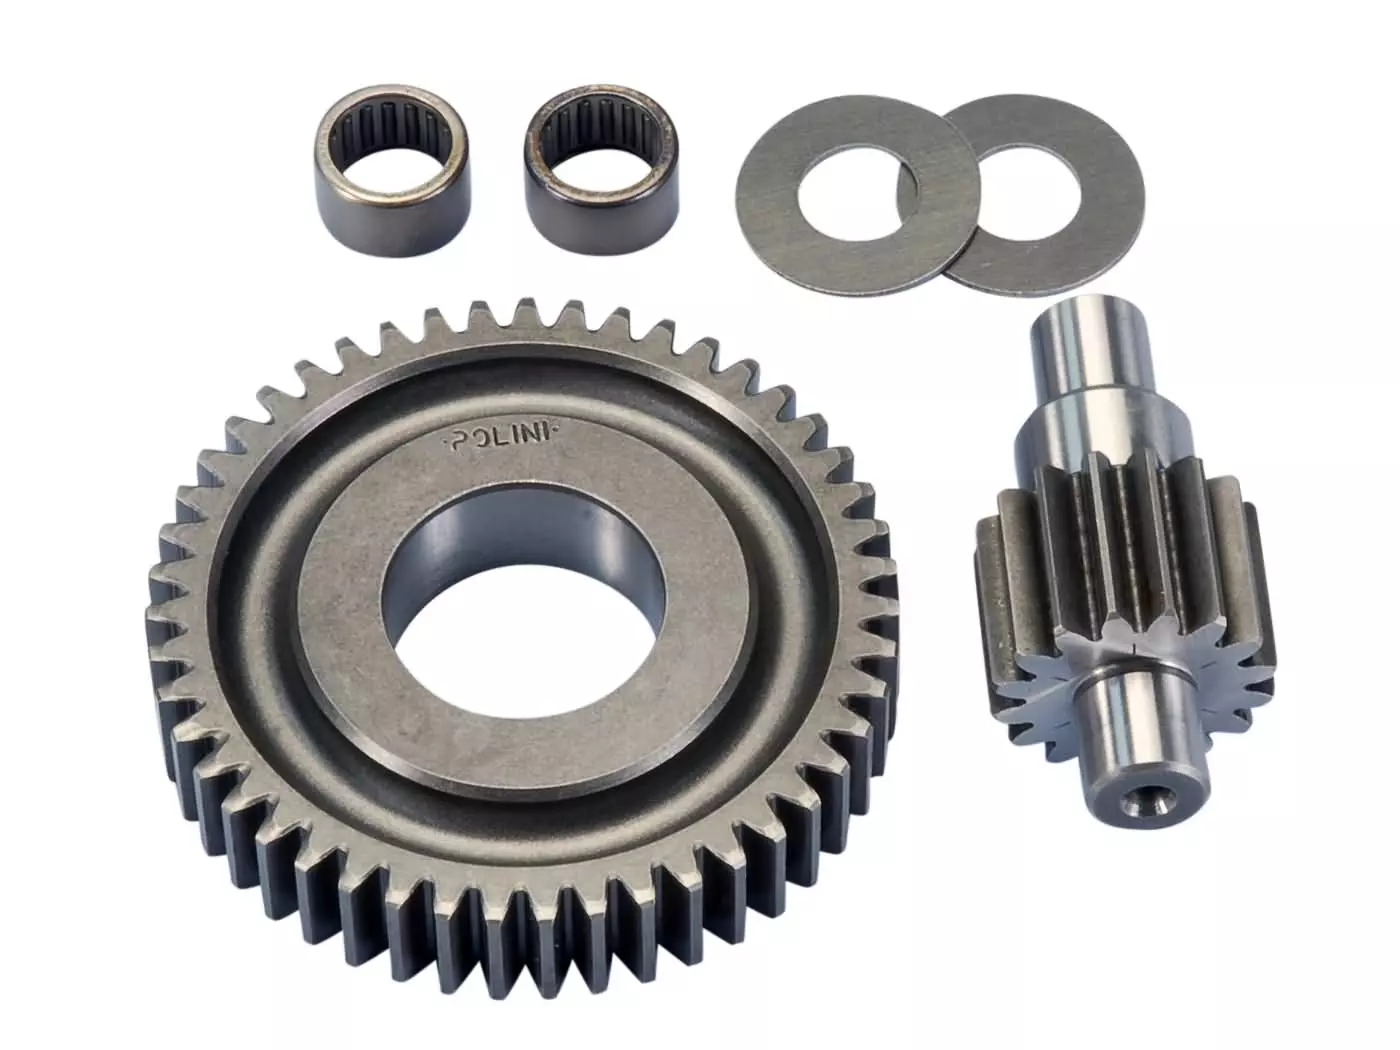 Secondary Transmission Gear Up Kit Polini 16/47 17.7mm For Piaggio 50 2T 1999